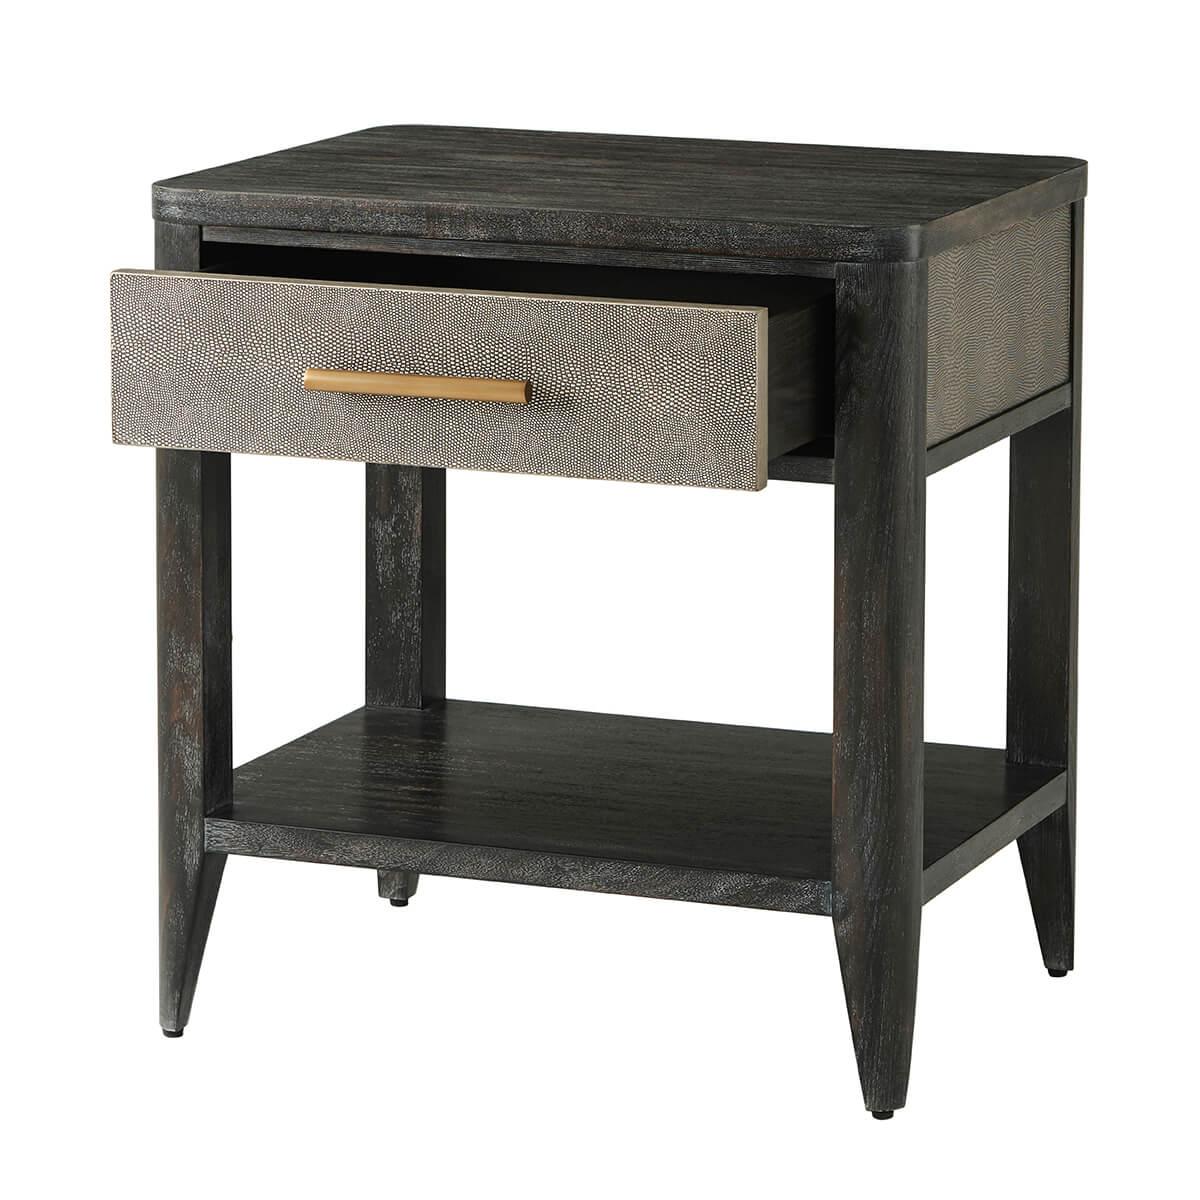 In the rowan finish with Komodo embossed leather sides. The rectangular bedside table has a soft-closing single drawer with a brushed brass handle, curbed corners and a lower shelf stretcher base.

Dimensions: 23.5